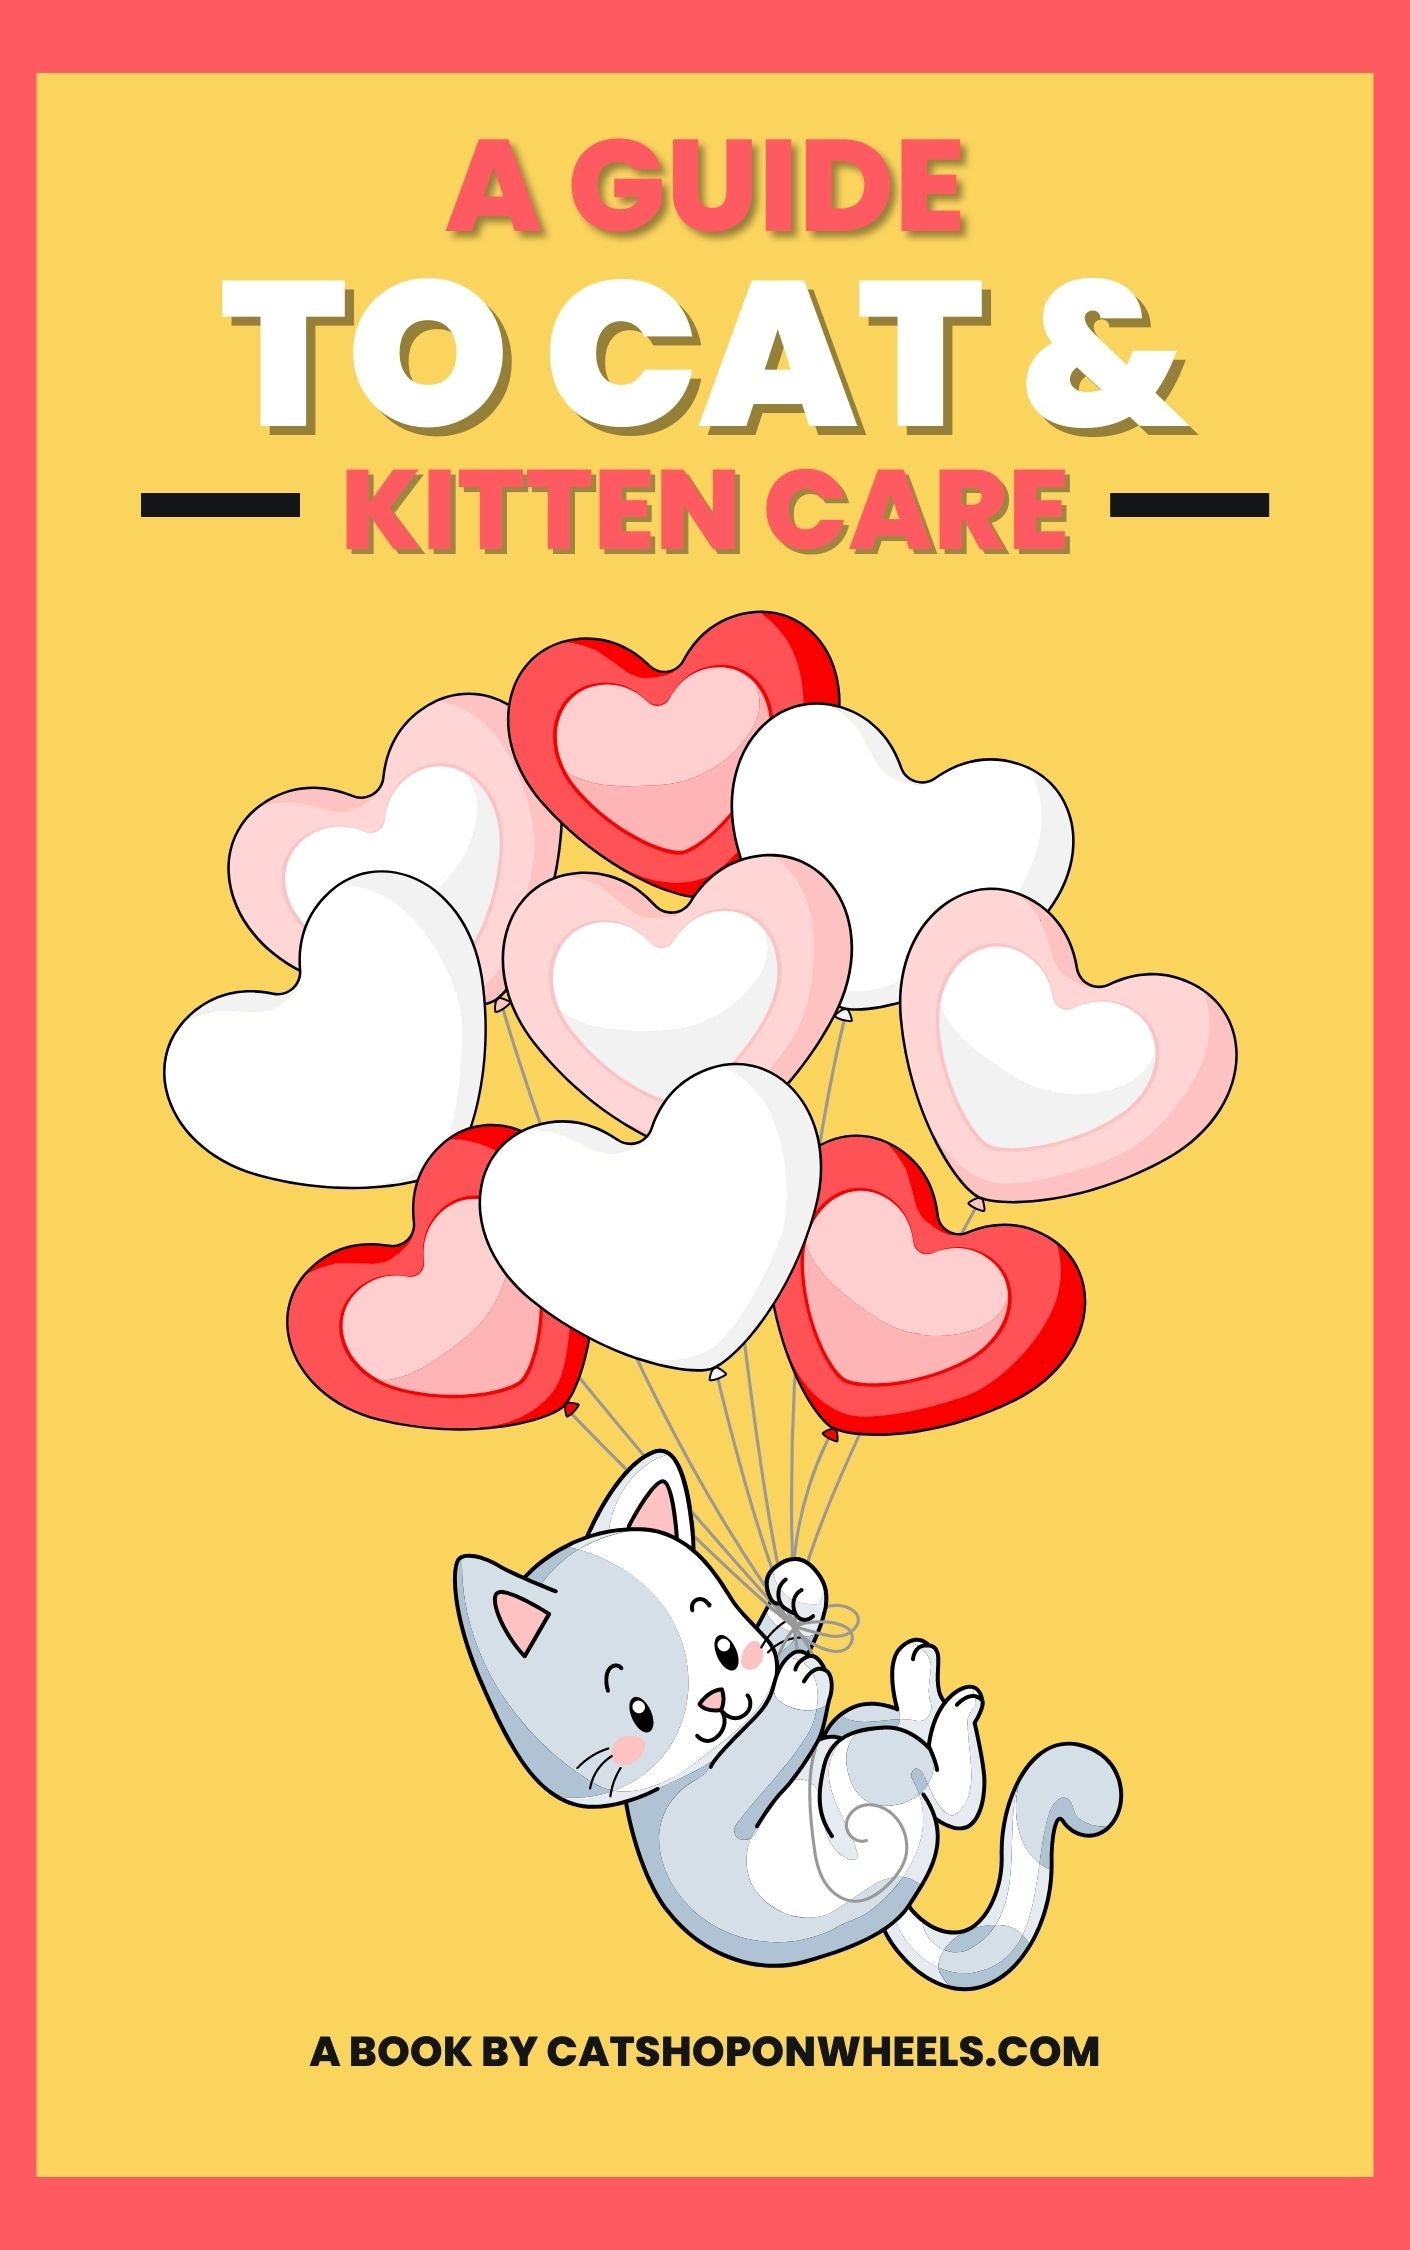 guide-to-cat-and-kitten-care-book